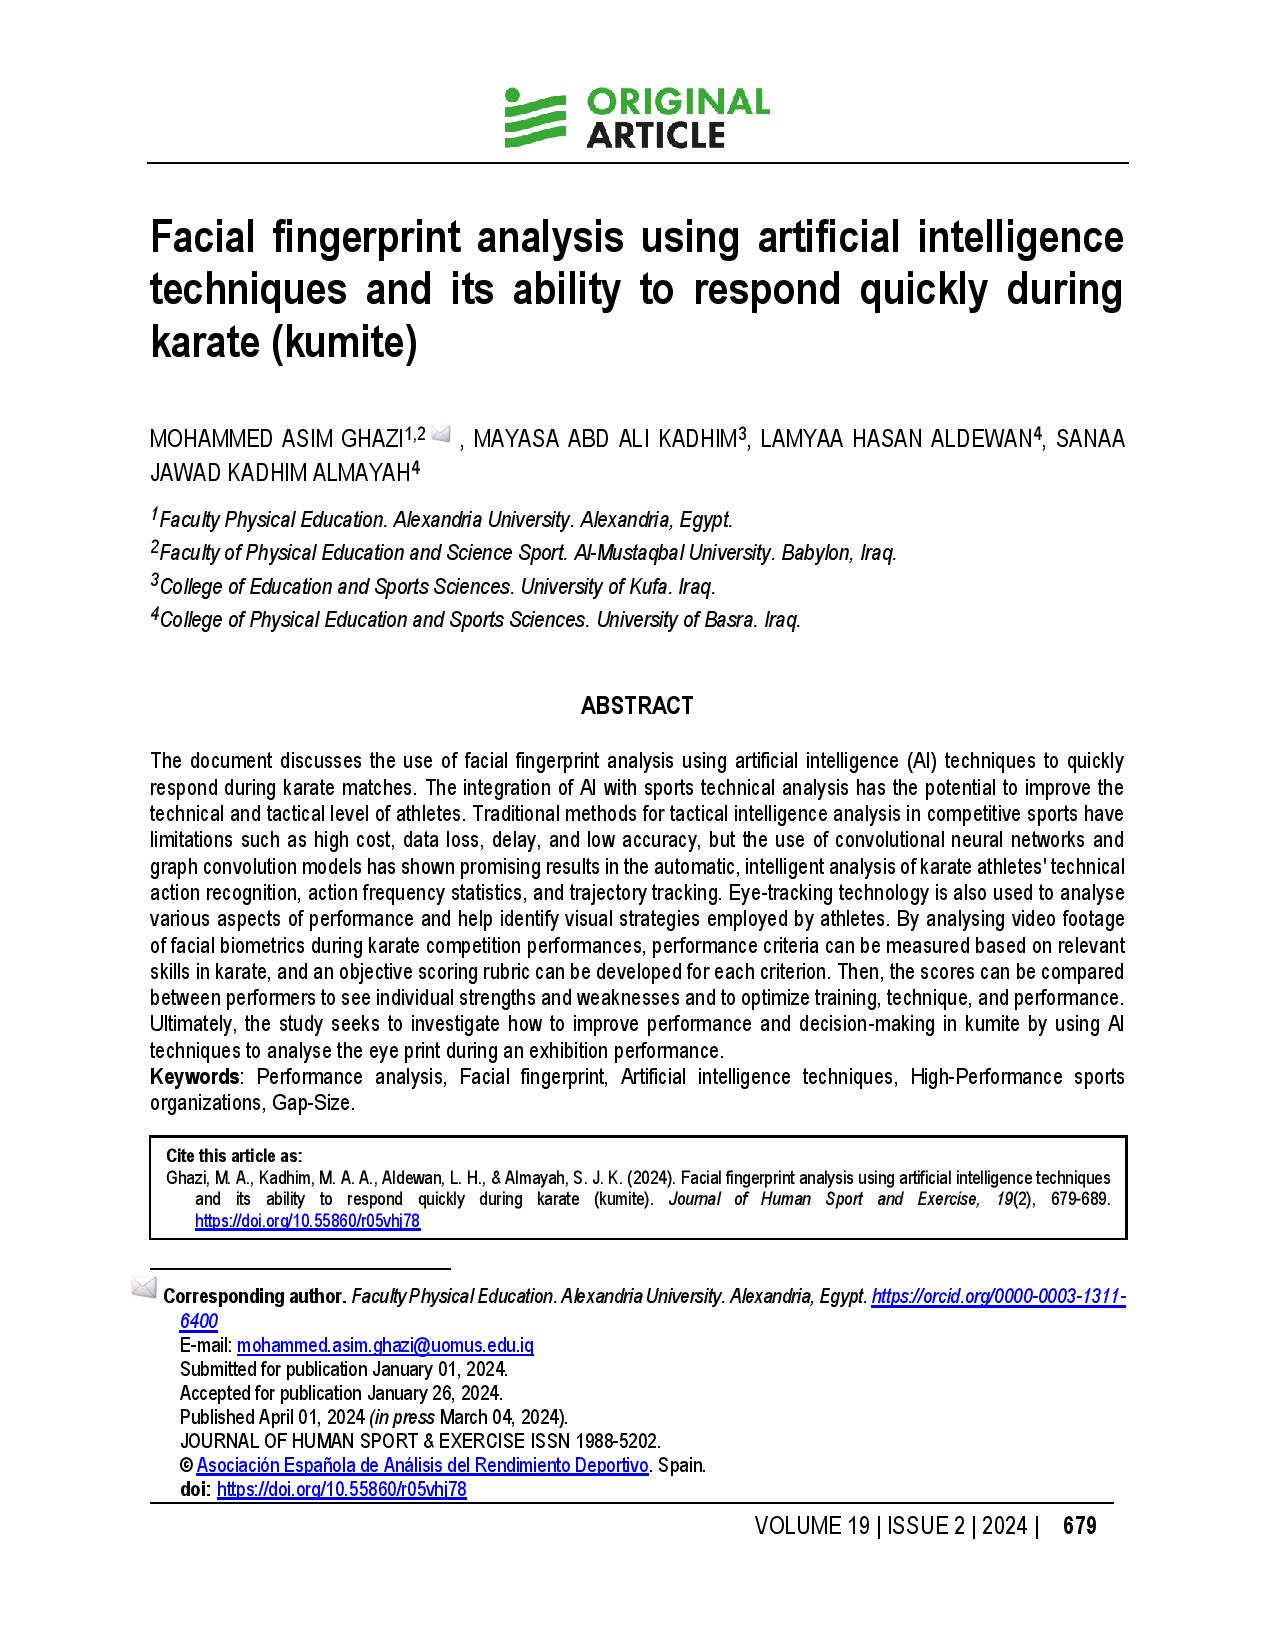 Facial fingerprint analysis using artificial intelligence techniques and its ability to respond quickly during karate (kumite)